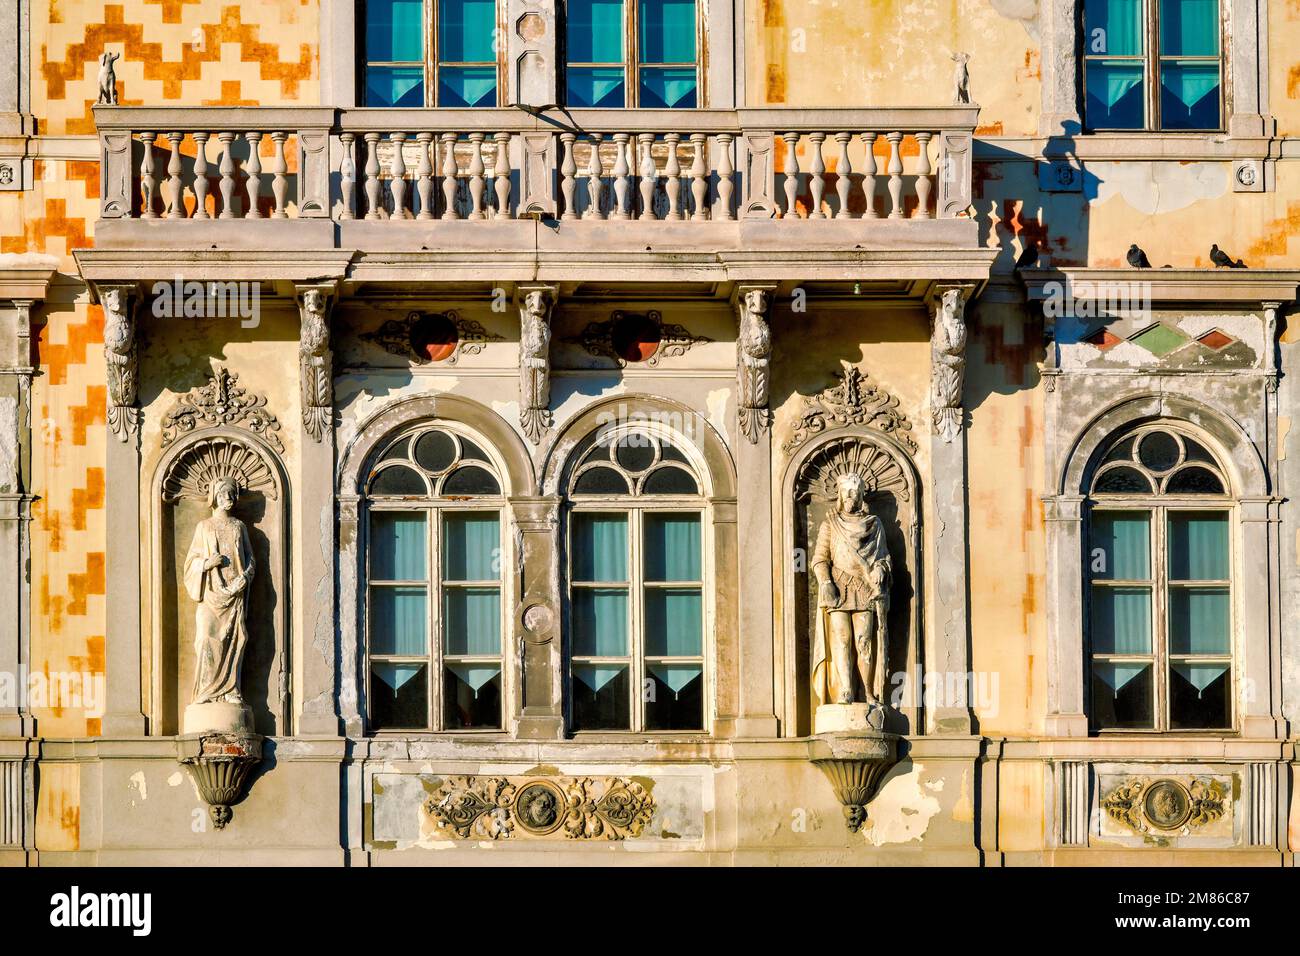 Balcon du Palazzo Gopcevich, Trieste, Italie Banque D'Images